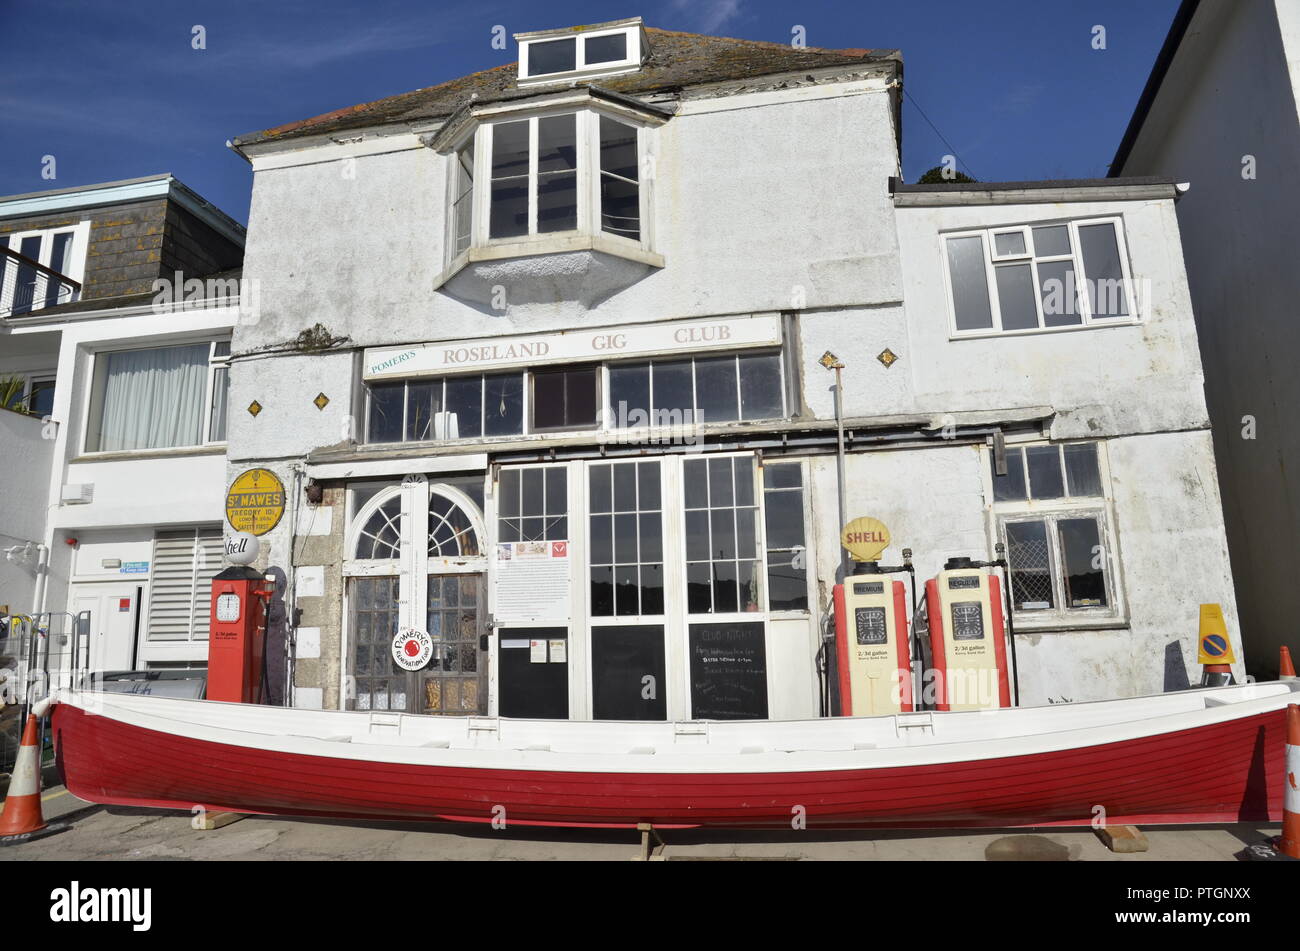 The frontage of the Roseland Gig Club on the waterfront in St Mawes, Cornwall Stock Photo